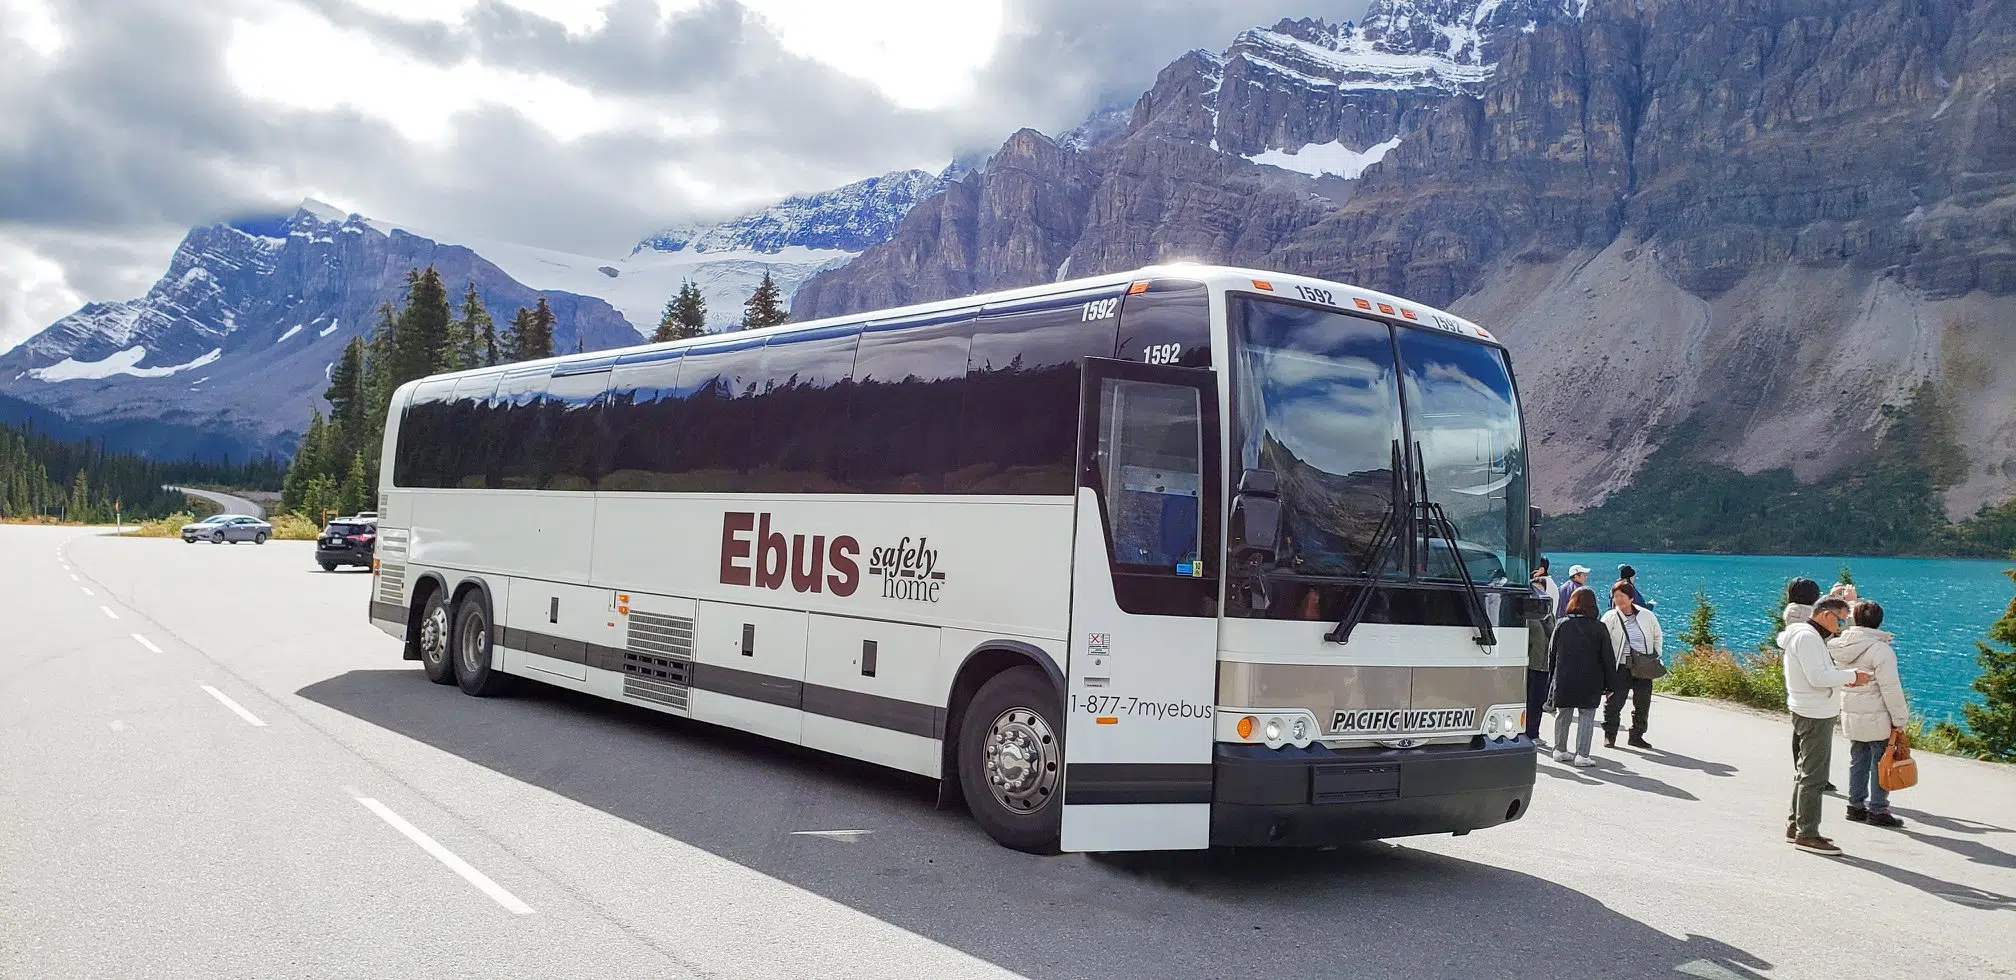 Ebus approved to add stops in Salmon Arm and Chase, denied route from Kamloops to Prince George